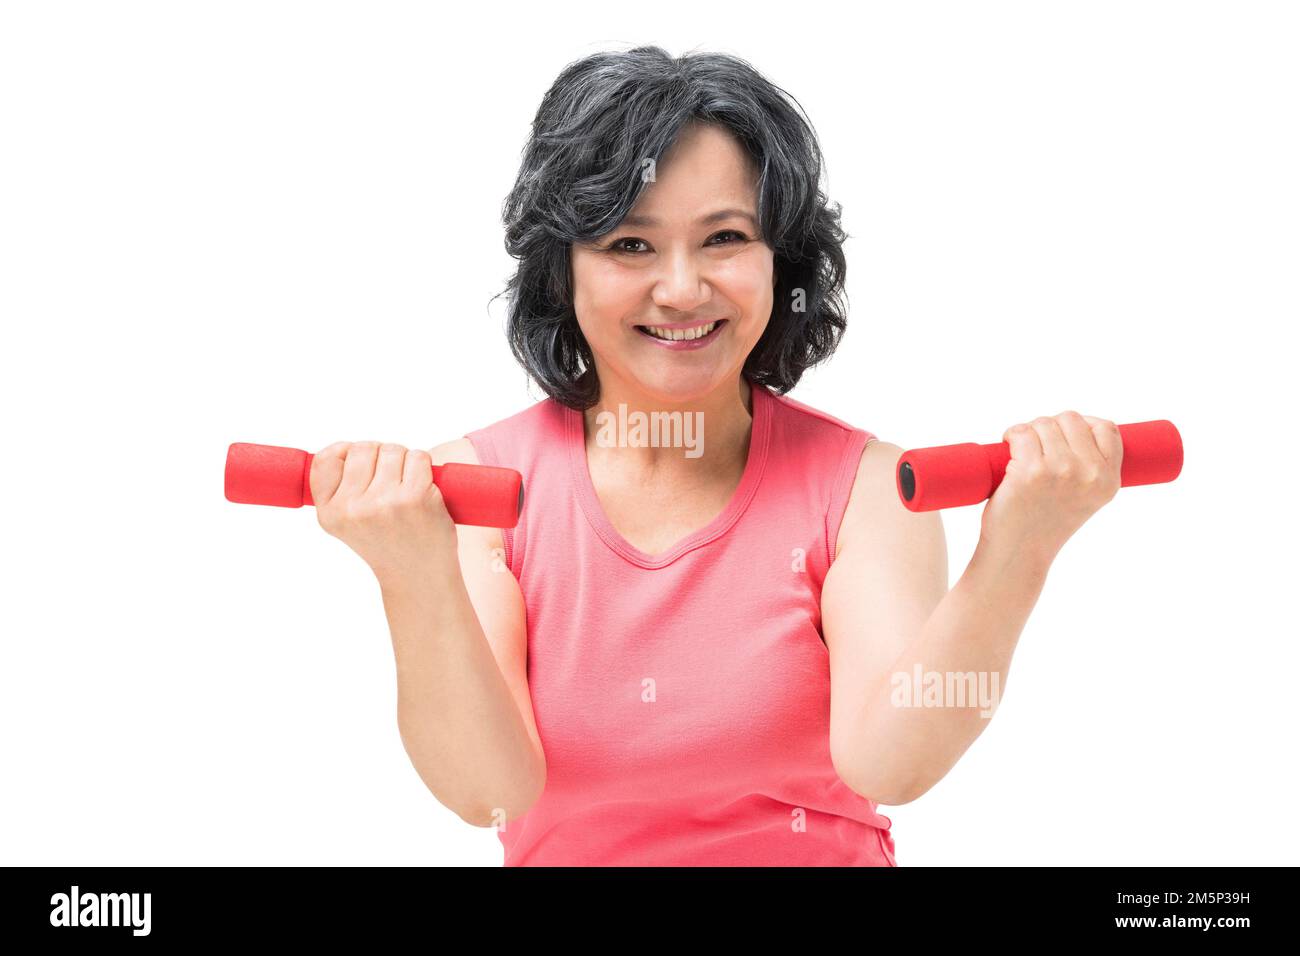 Dumbbell in old people Stock Photo